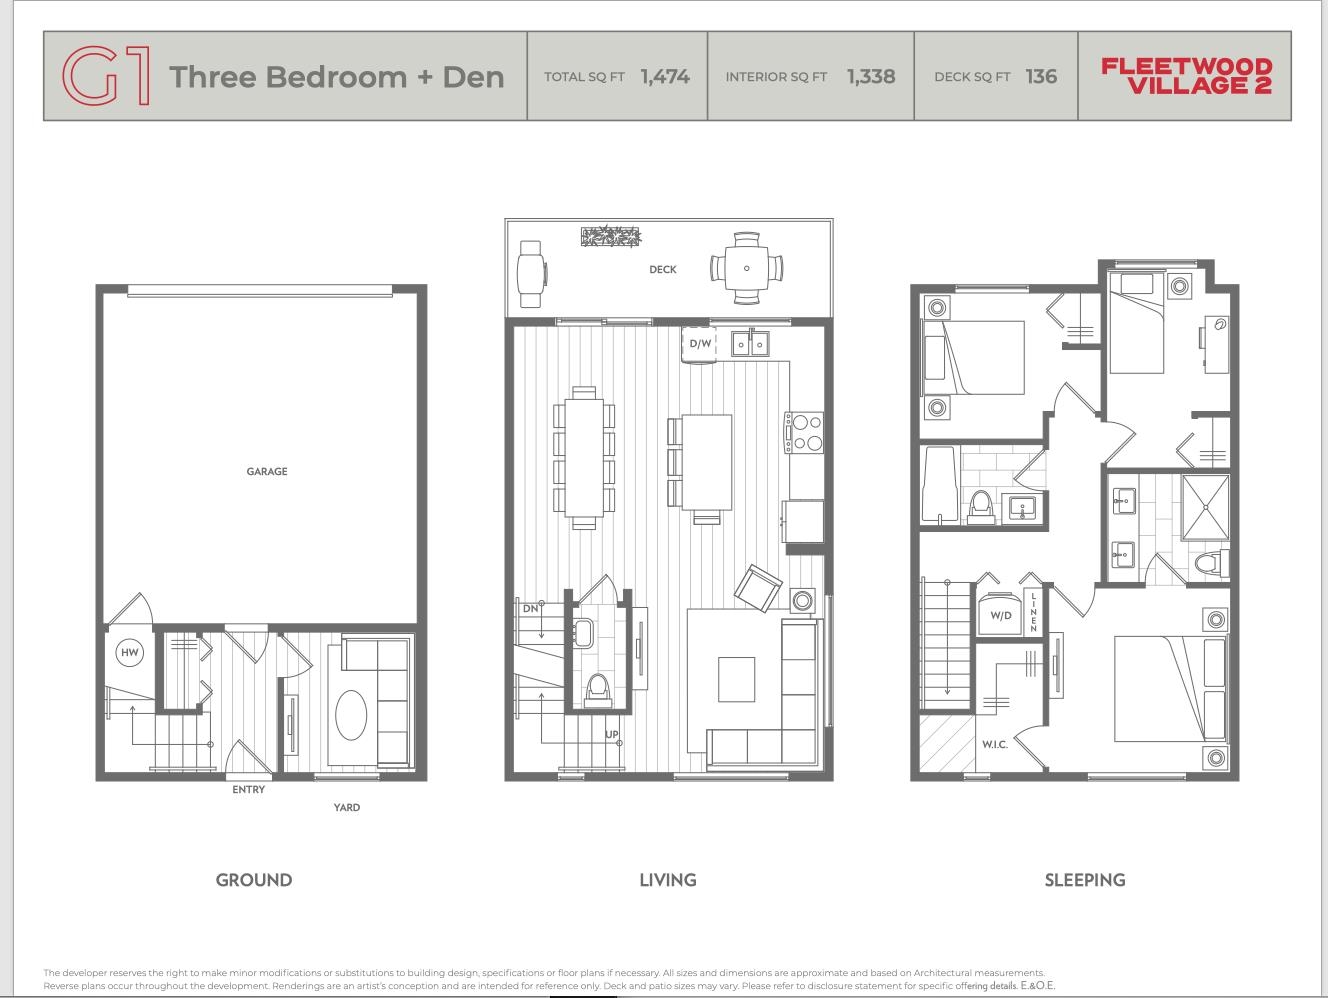 142 Floor Plan of Fleetwood Village 2 Towns with undefined beds